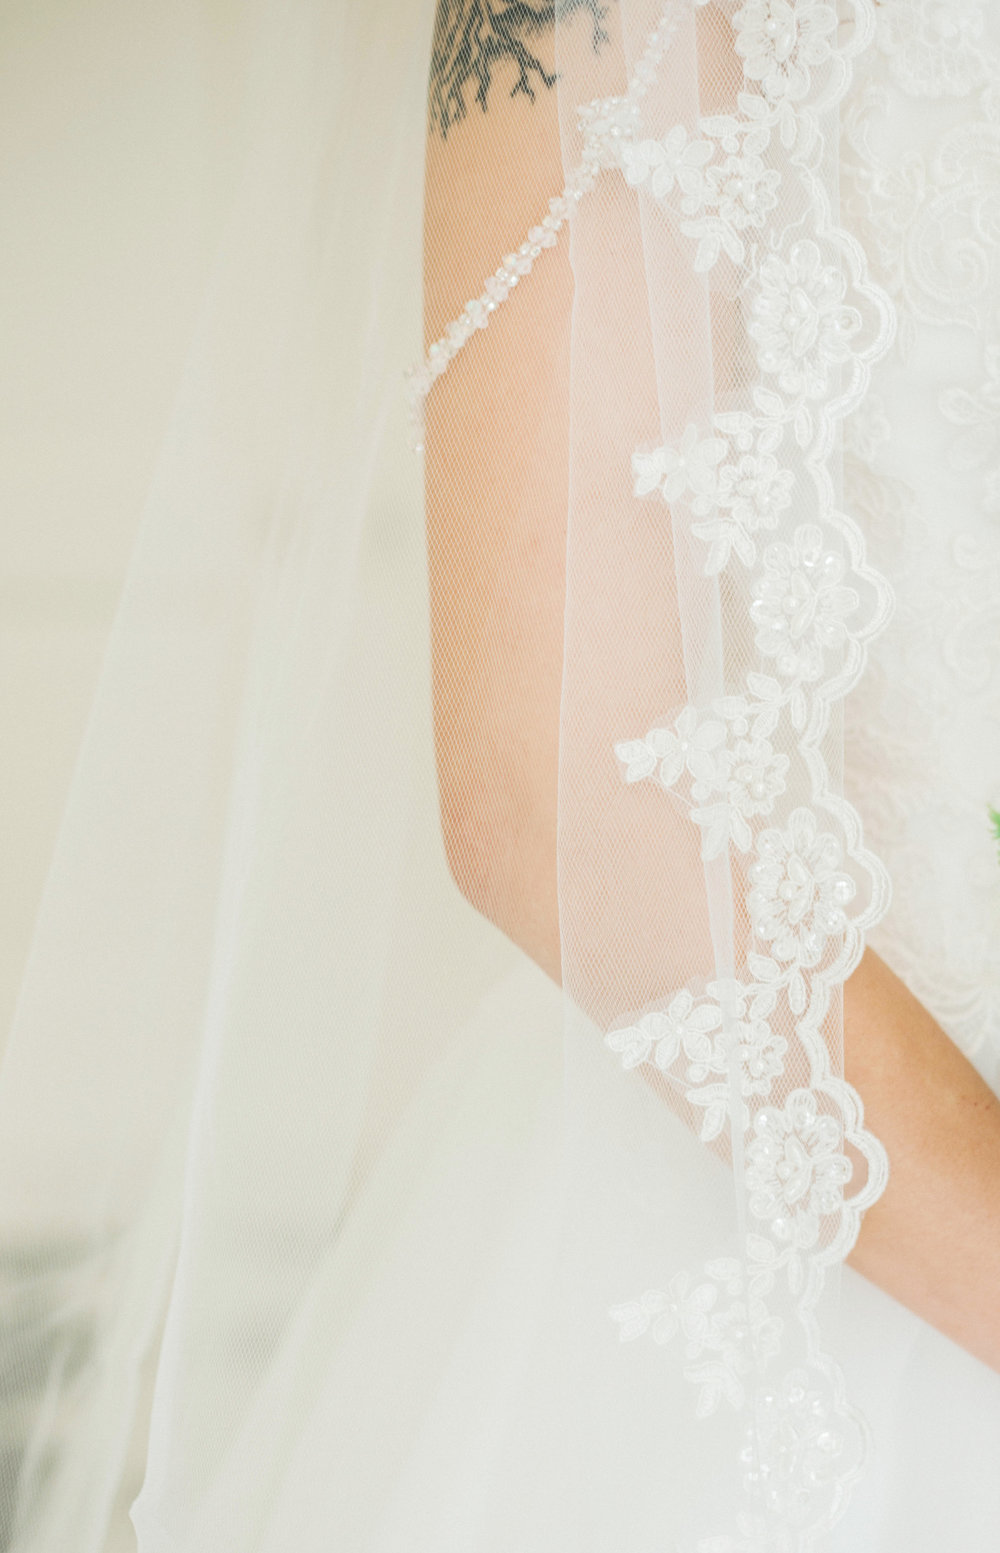 A lace cathedral length wedding veil.